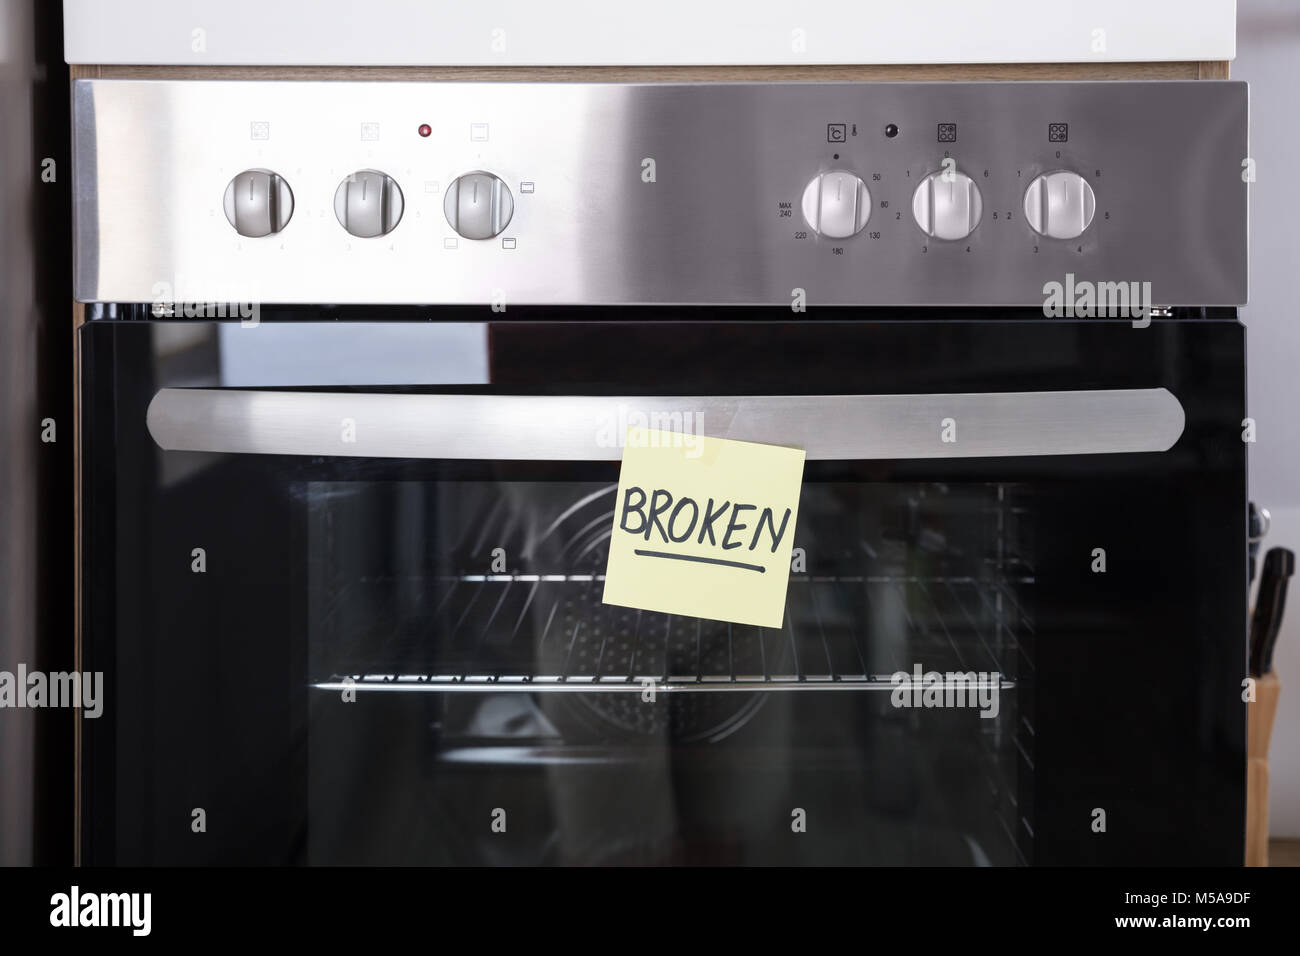 Close-up Of A Oven With Sticky Notes Showing Broken Text Stock Photo